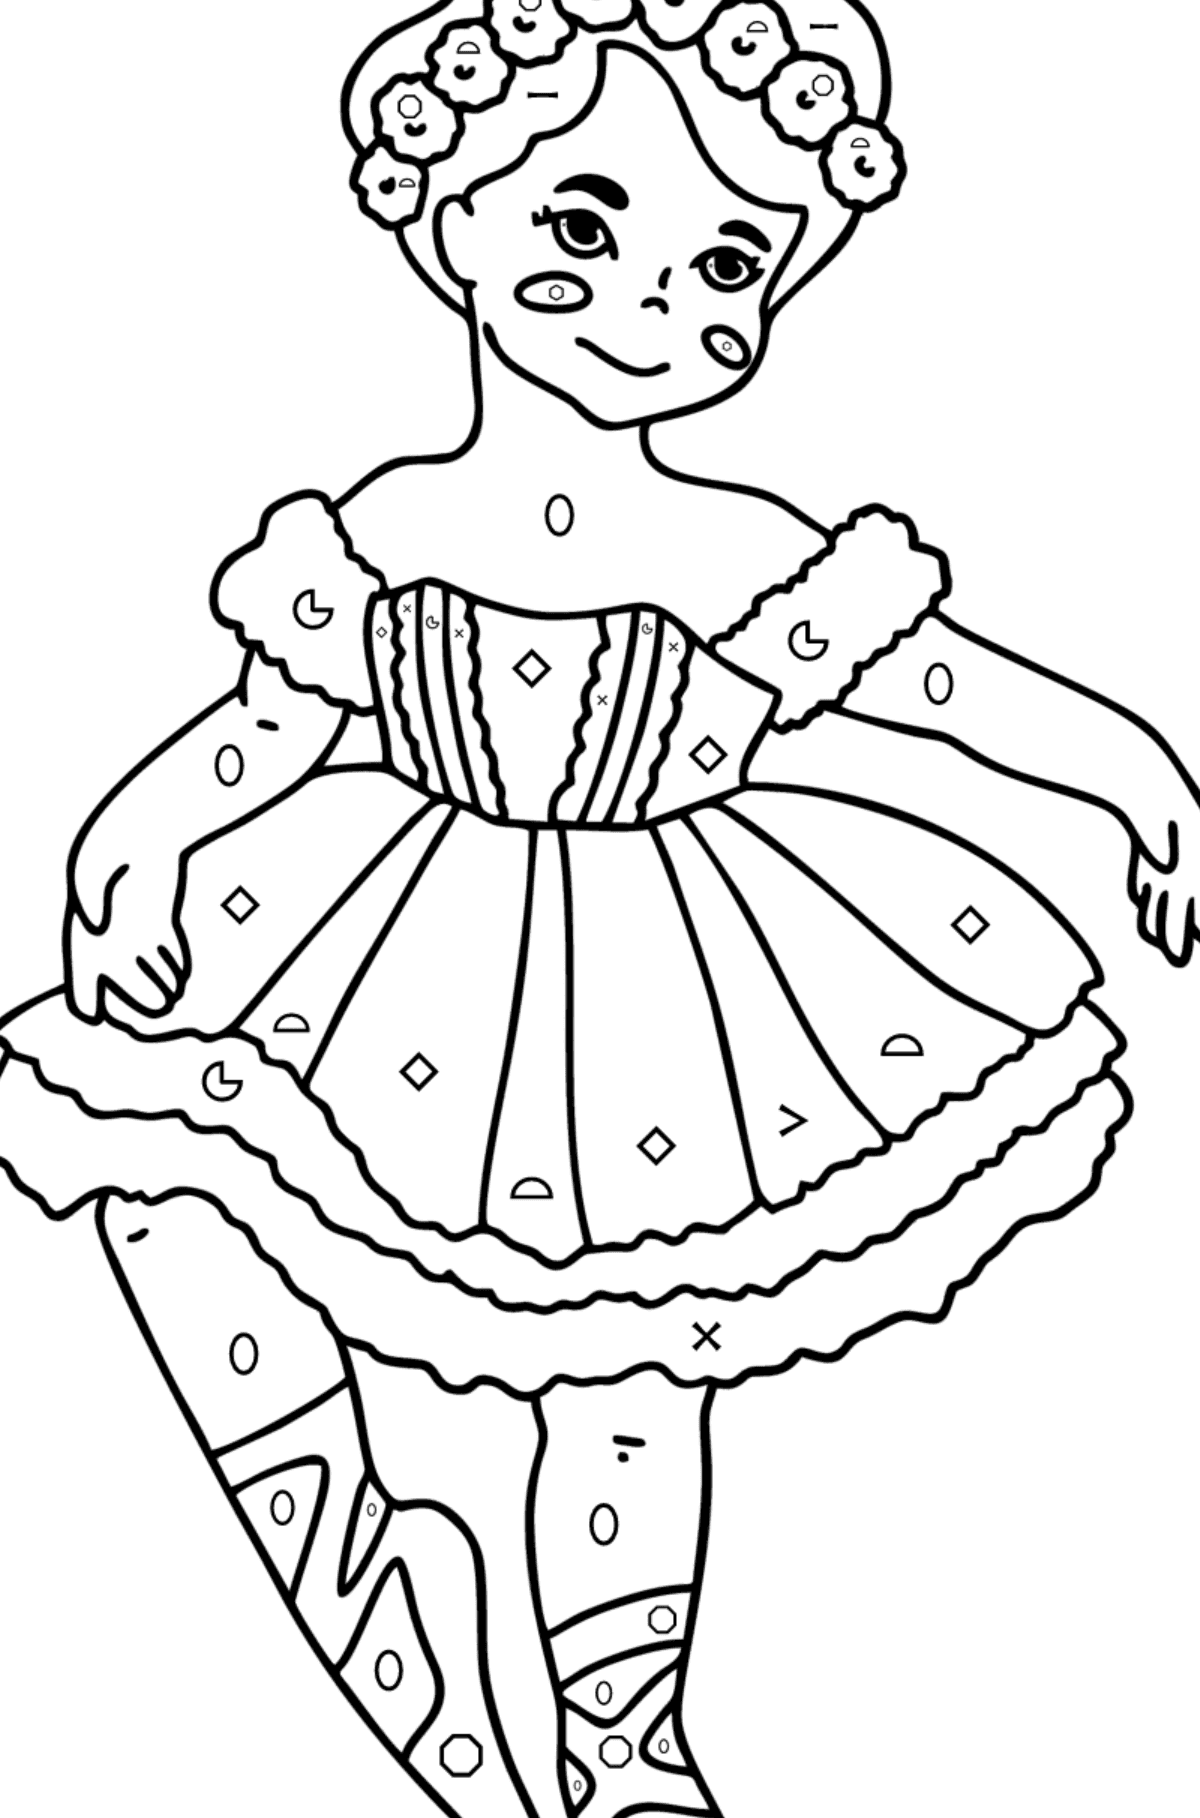 Ballerina girl сoloring page - Coloring by Symbols and Geometric Shapes for Kids